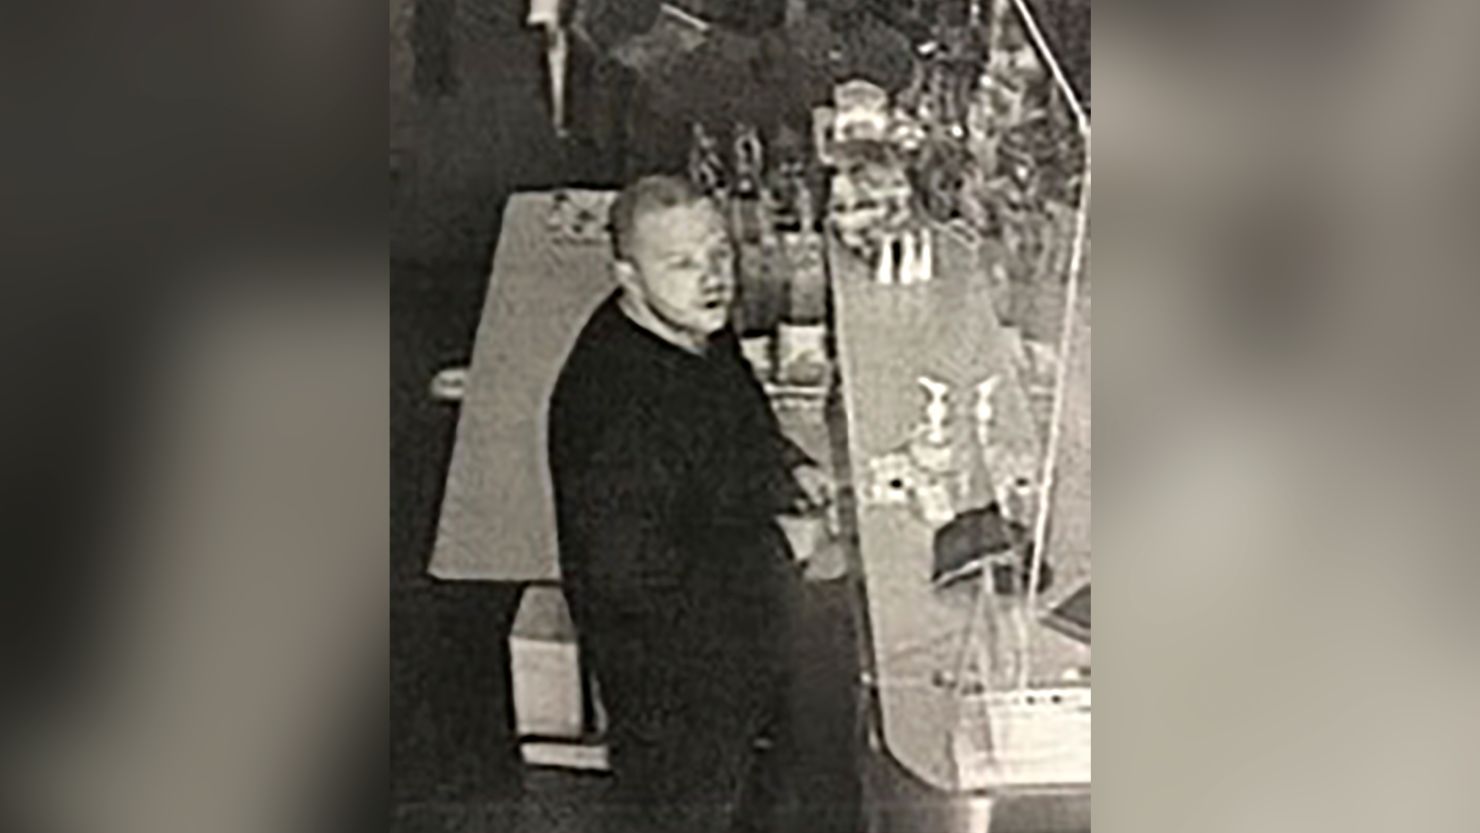 The suspect in the Oregon killings seen in a security camera image provided by the Lane County Sheriff's Department.